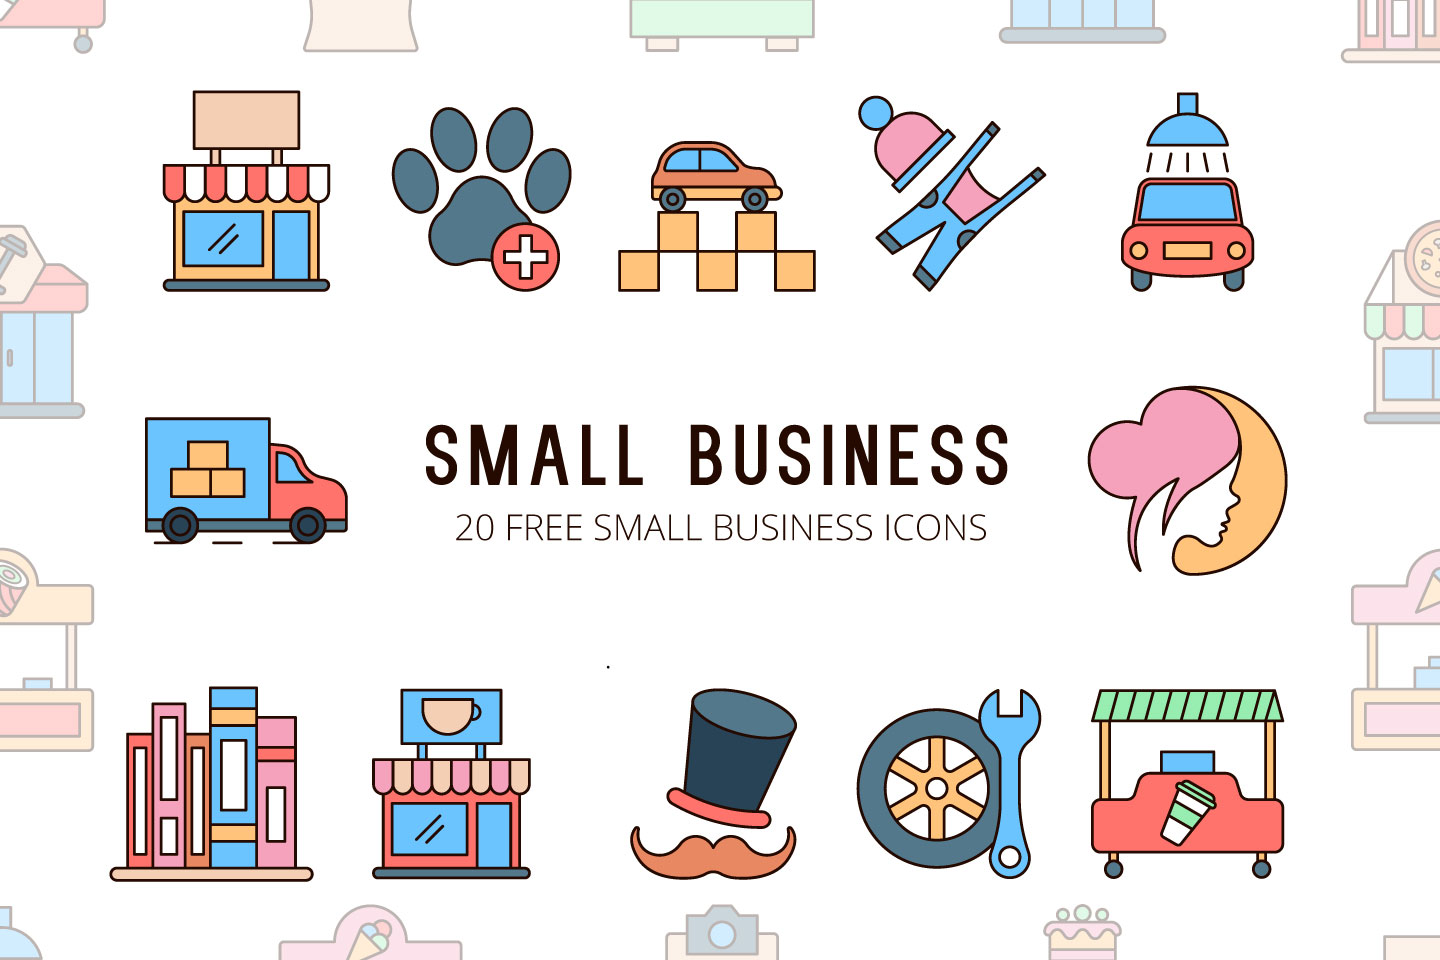 Download Small Business Vector Free Icon Set - GraphicSurf.com